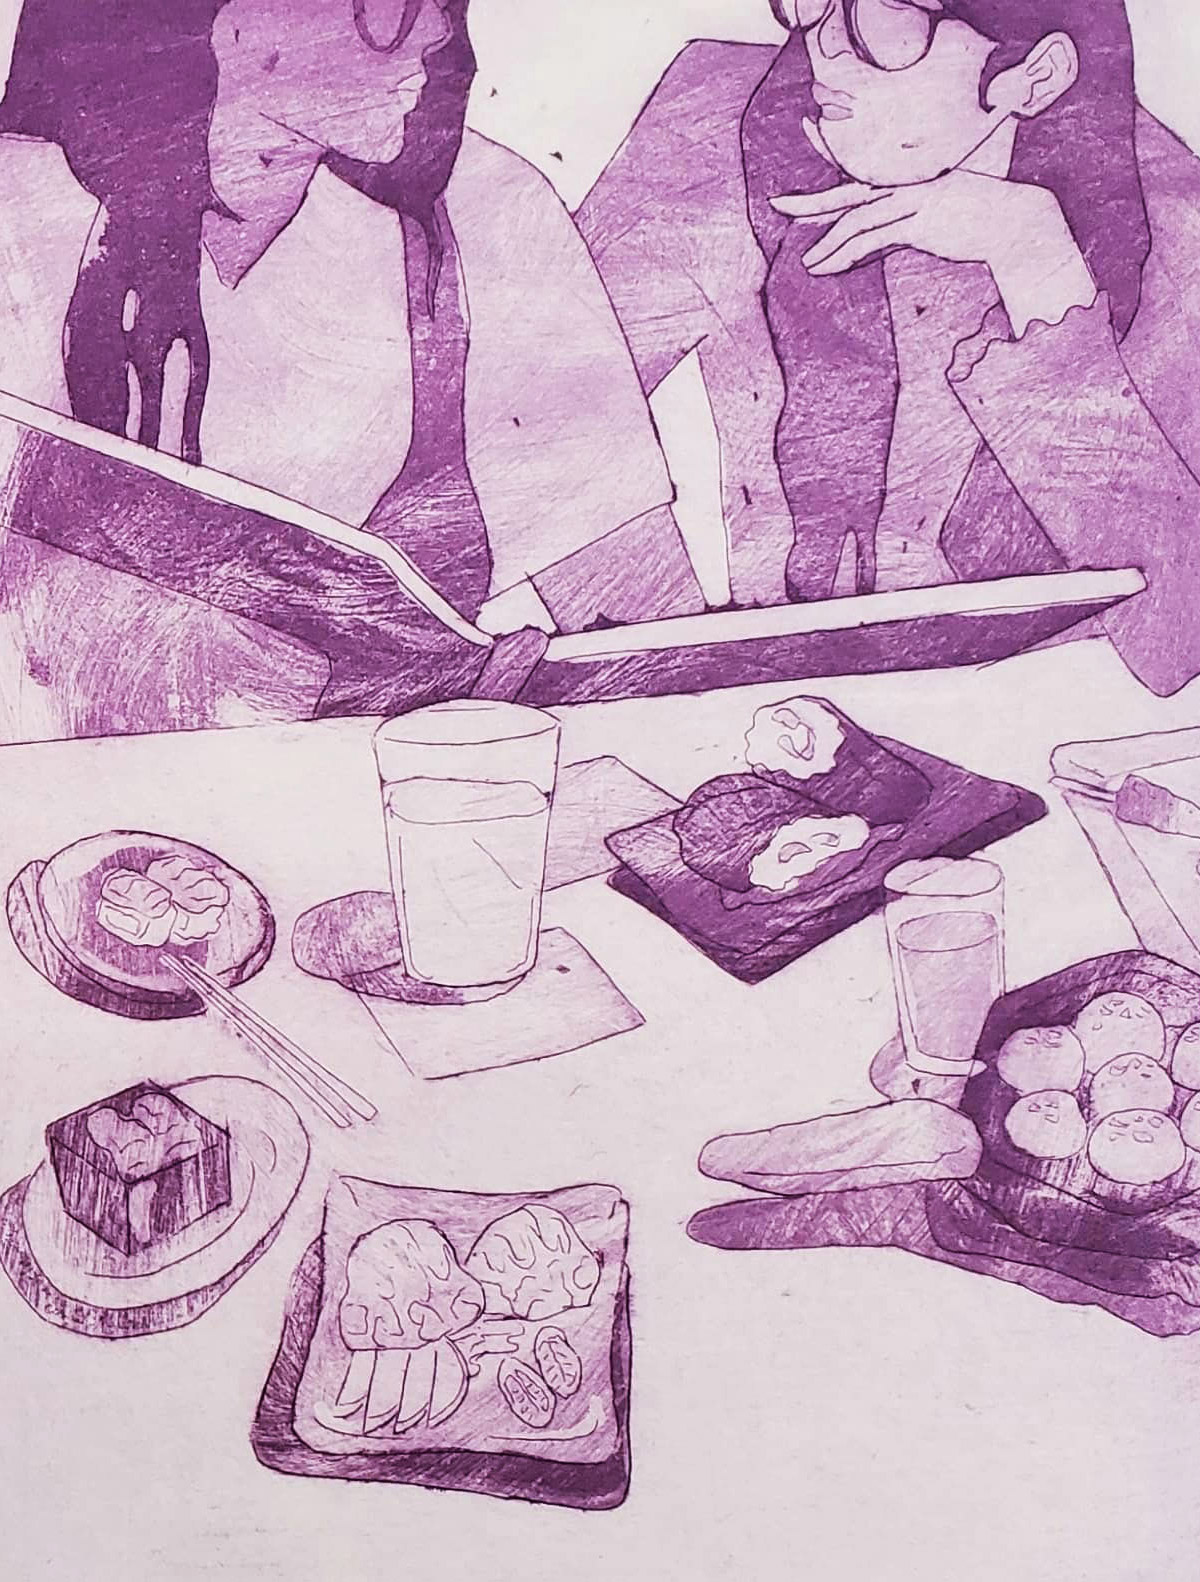 Rendered in shades of purple. Two women talking to each other while looking through a menu with dishes and beverages in front of them.